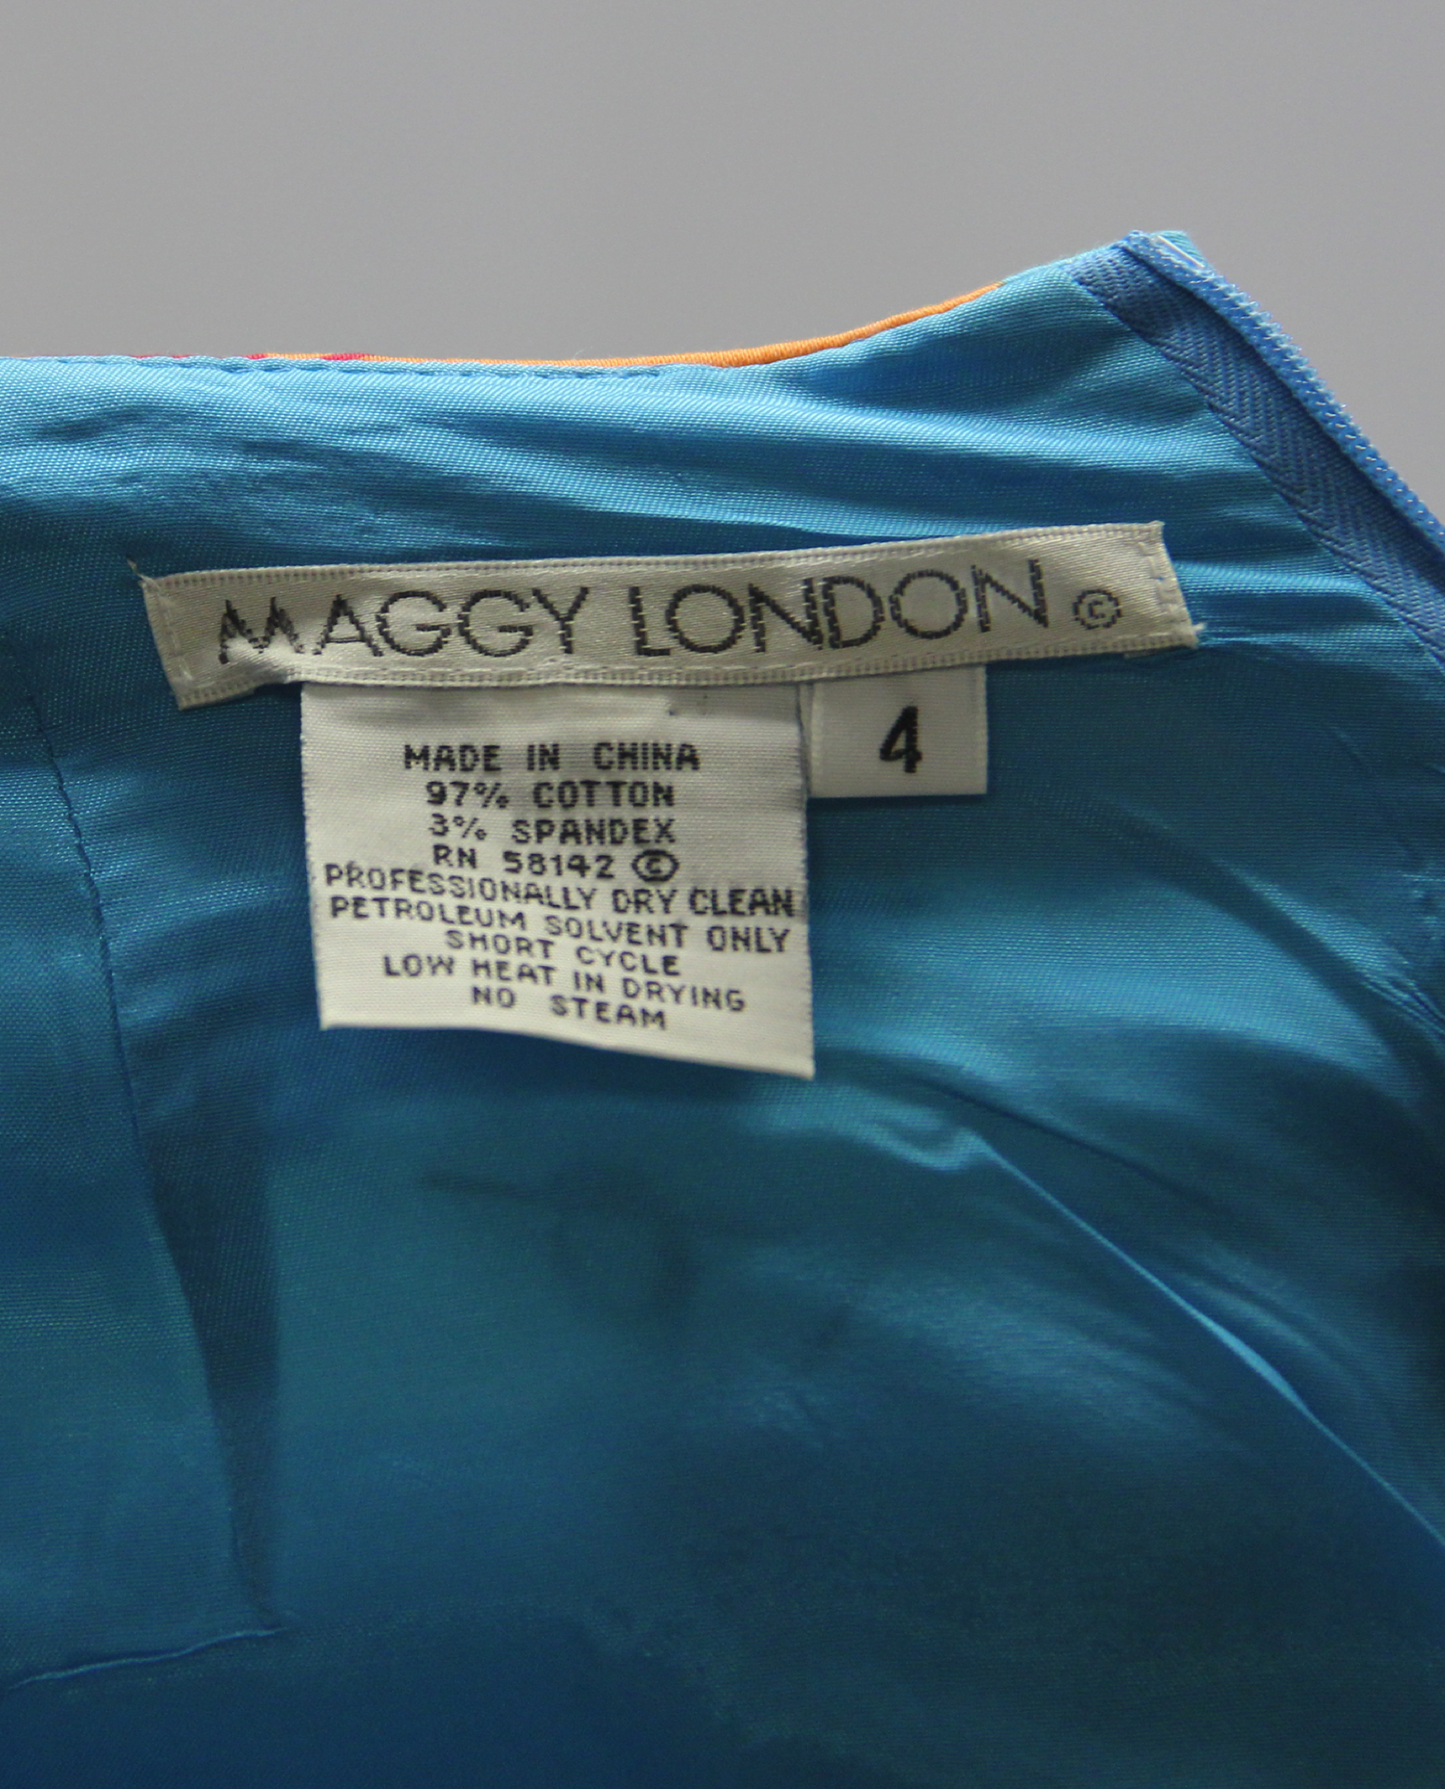 Maggy London I'm on a Boat Skirt Size 4 (SKU 000013) - Designers On A Dime - 4